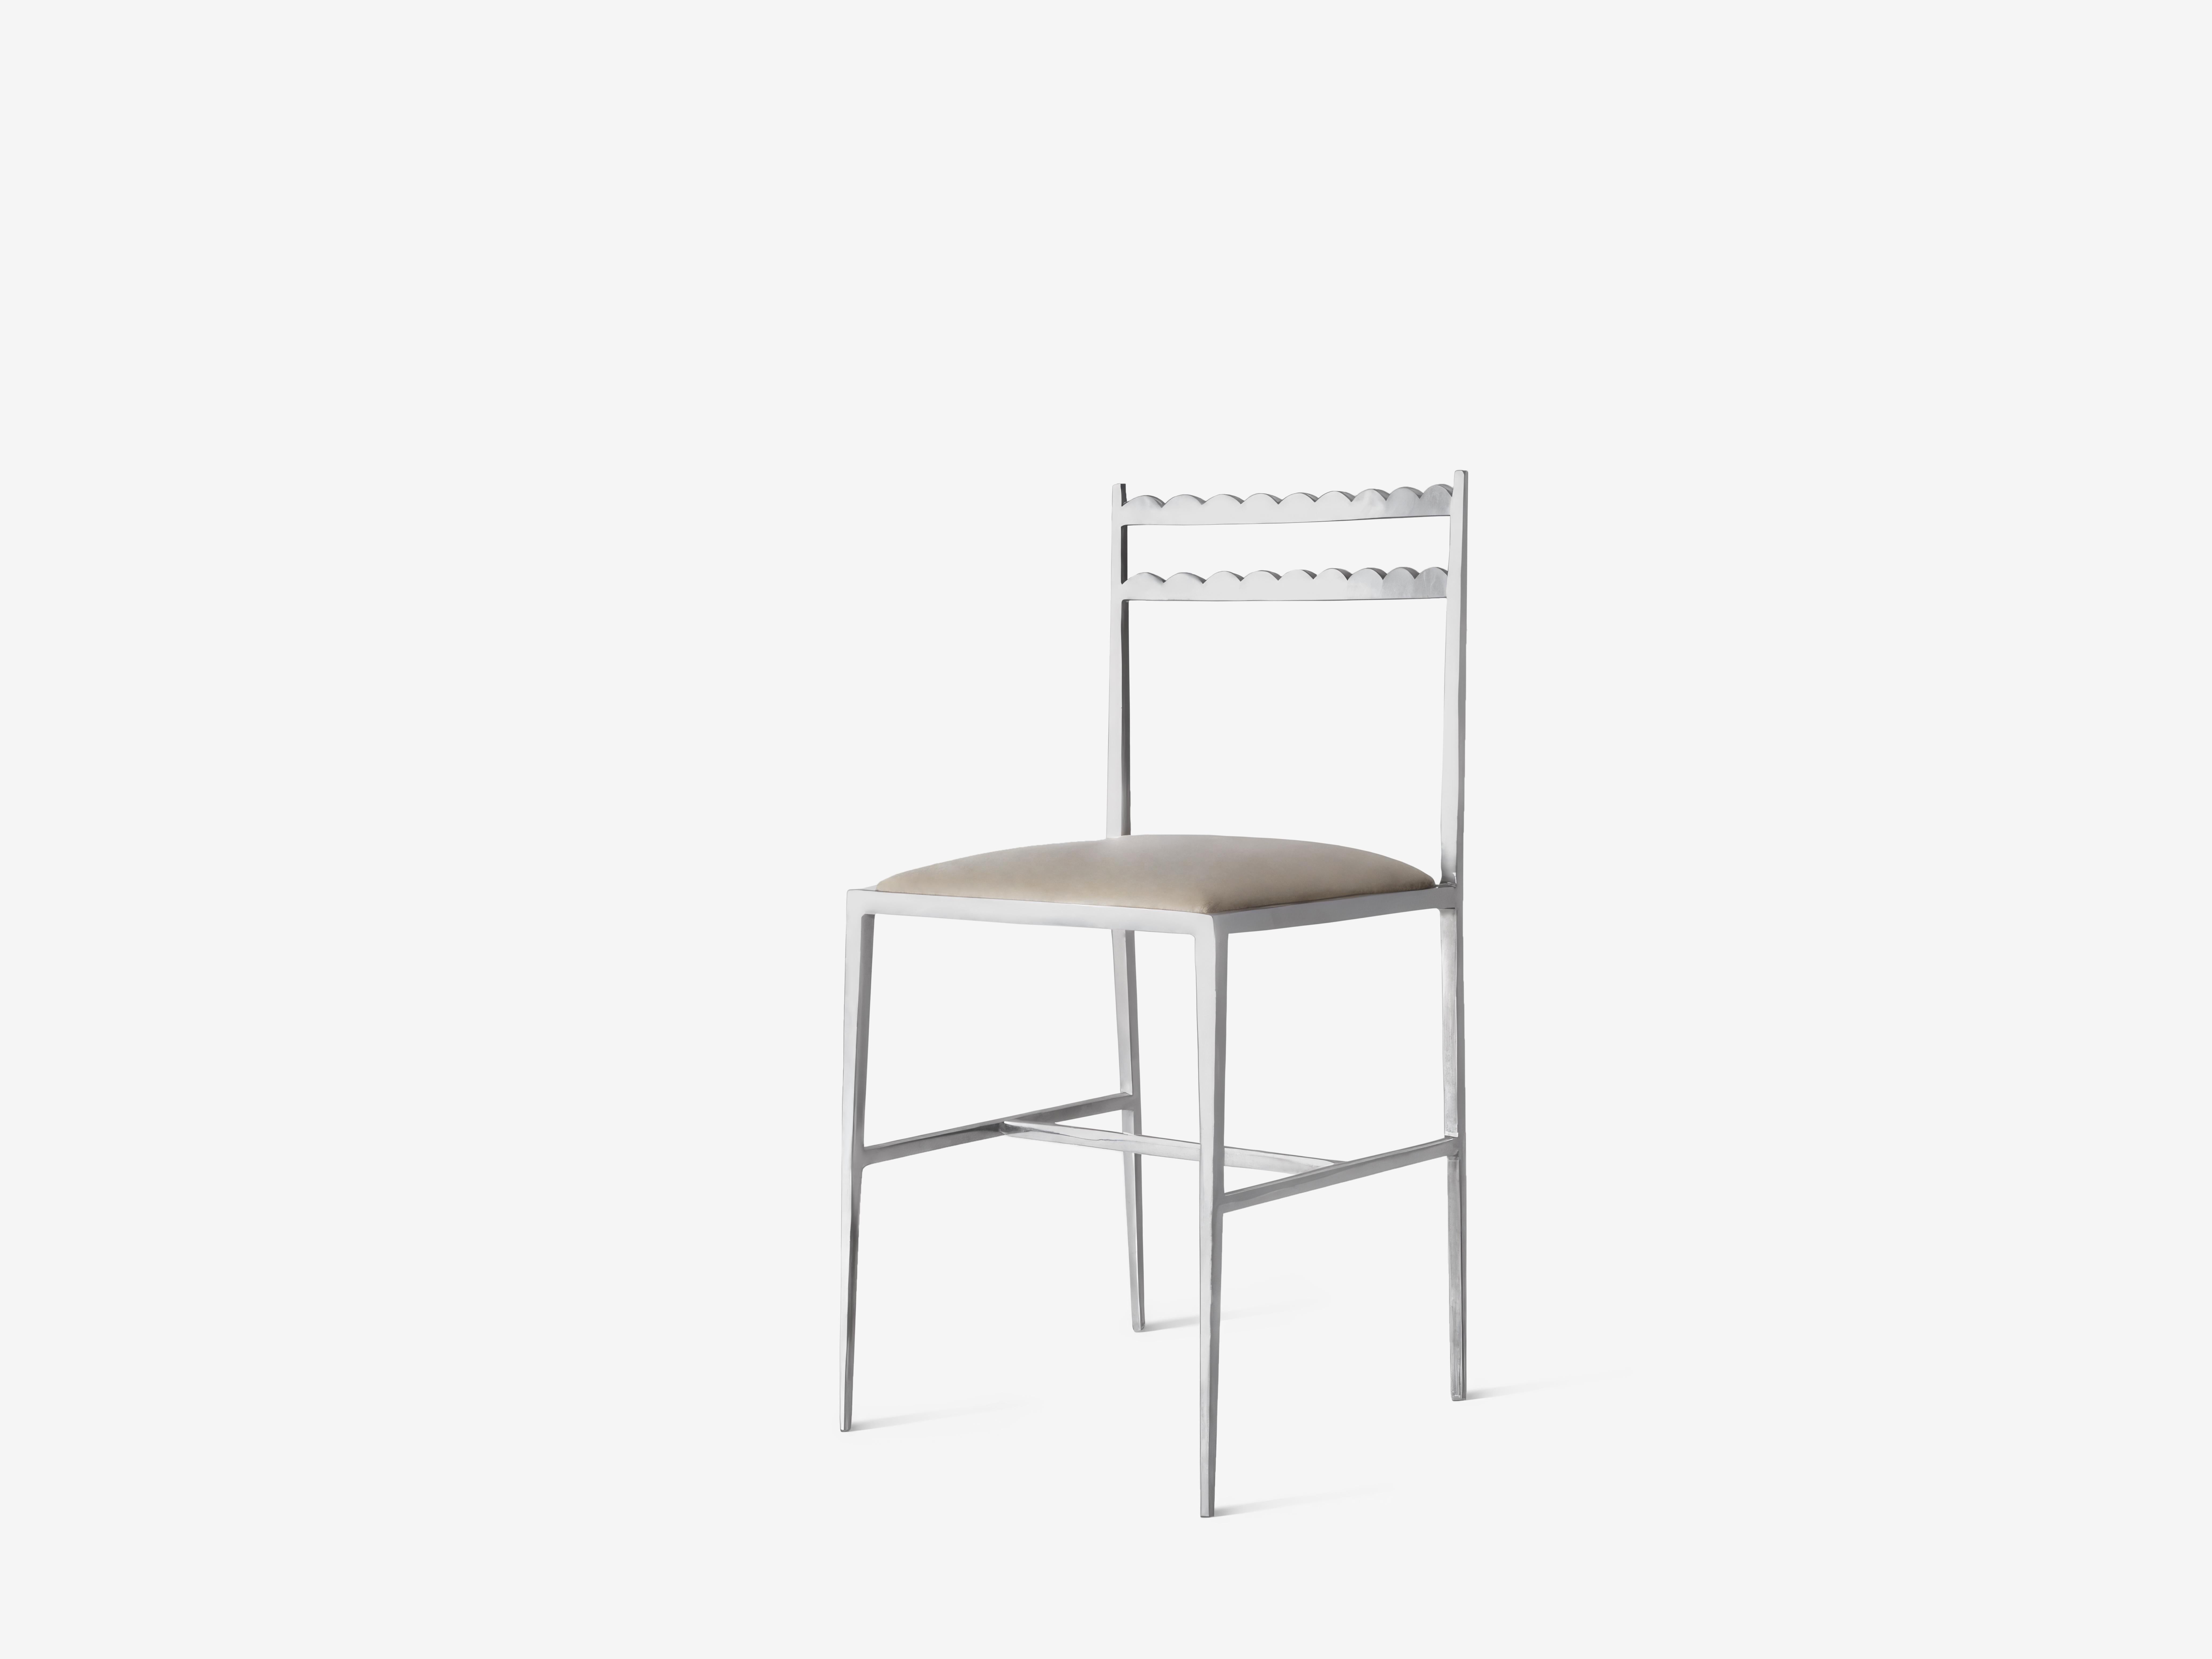 Set of 2 Lupita Dining Chair by OHLA STUDIO
Dimensions: D 40 x W 40 x H 83 cm 
Materials: Polished Aluminum.
Weight: 8.5 kg

This chair is inspired by the traditional 19th-century Mexican scallop carved benches that furnish the courtyard of small